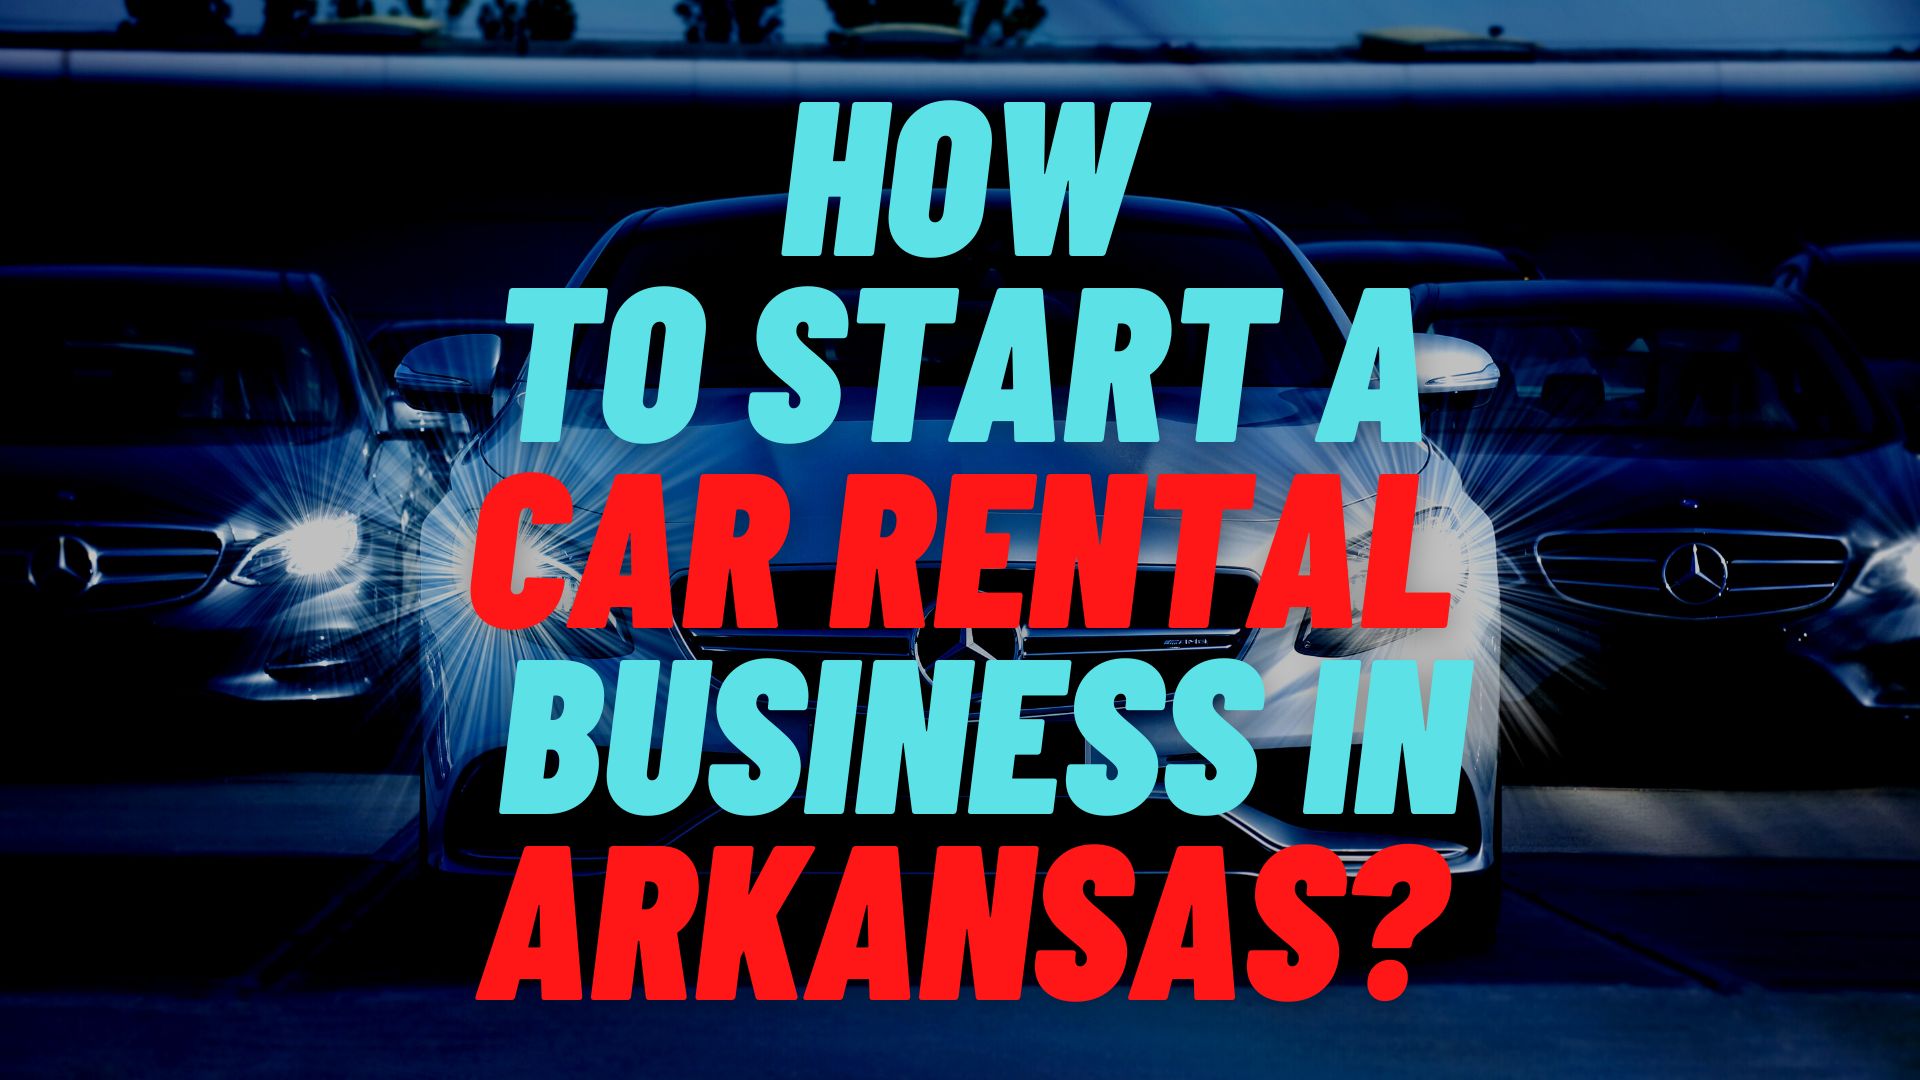 How to start a car rental business in Arkansas